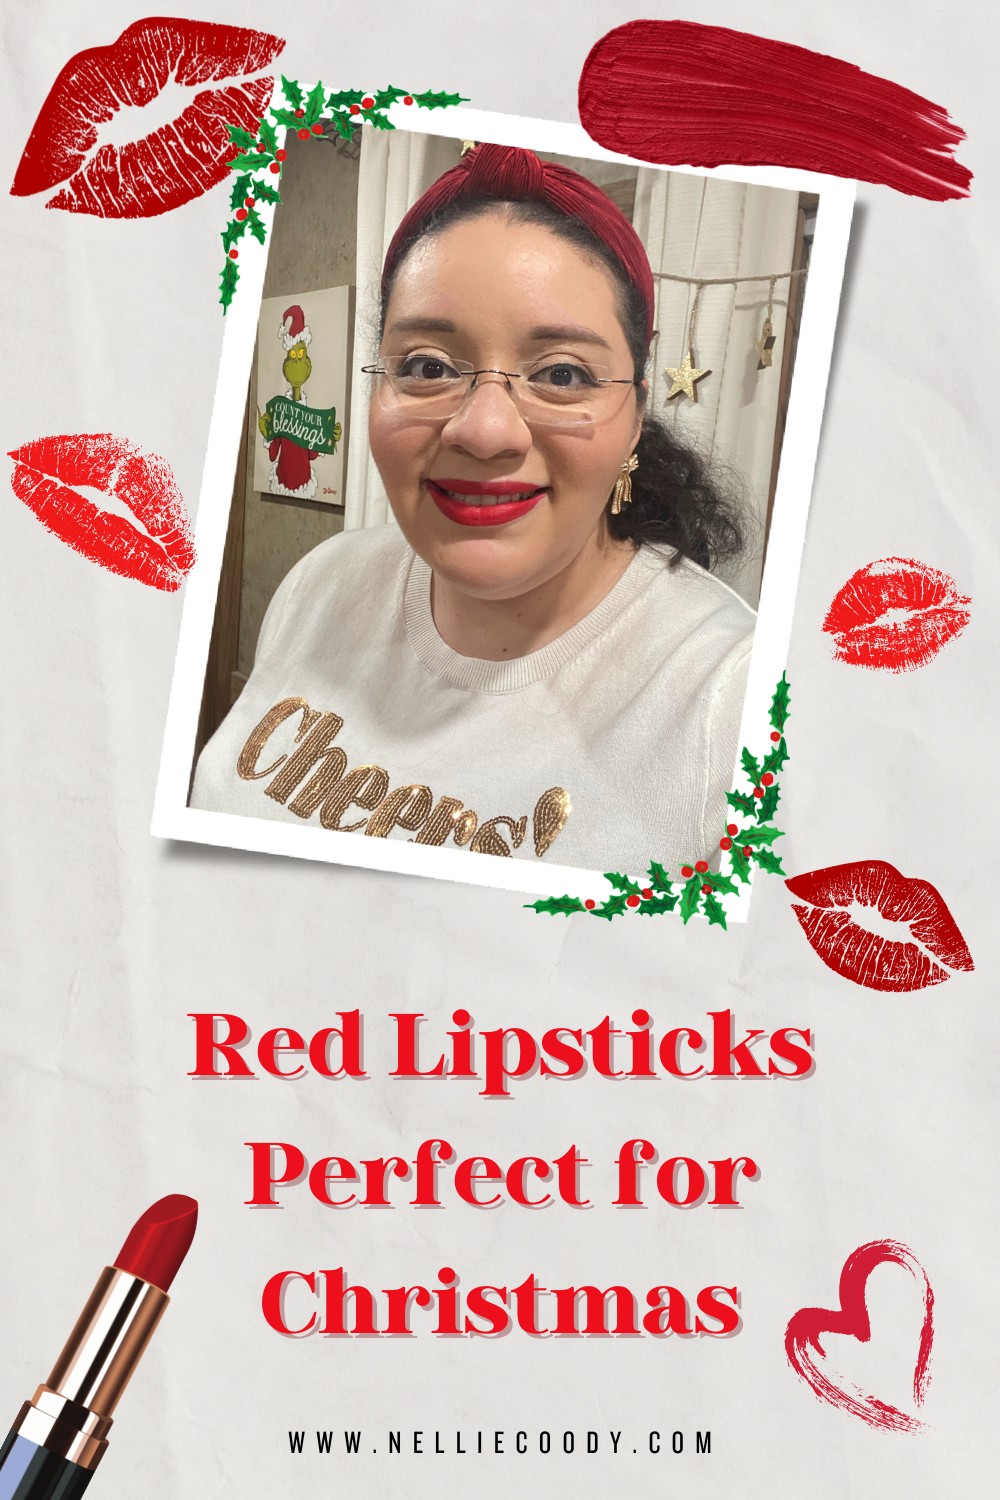 Red Lipsticks Perfect for Christmas